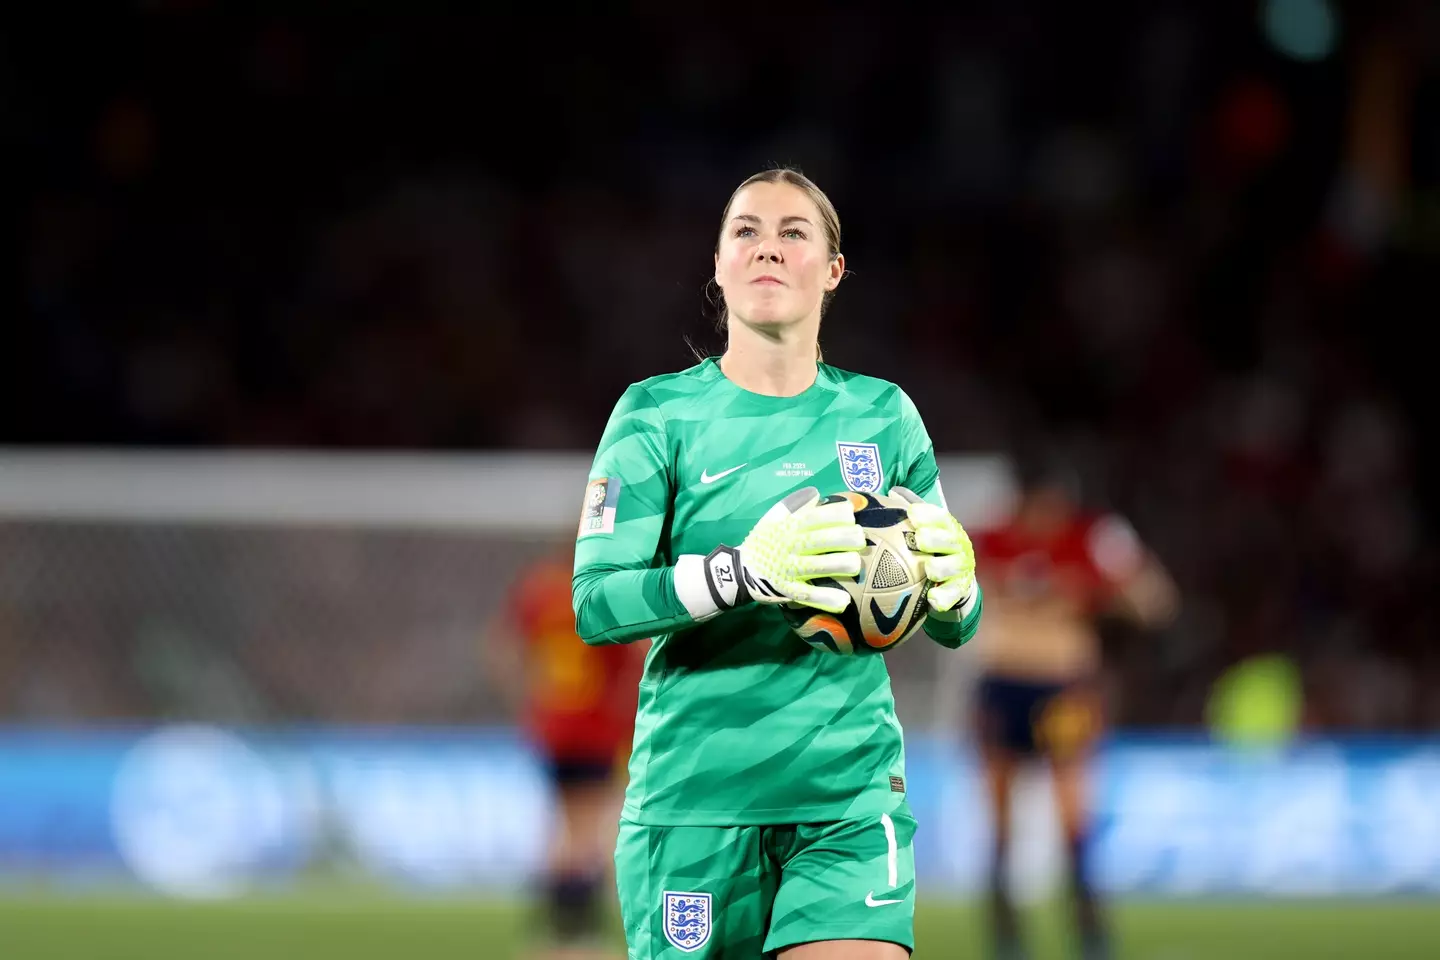 Nike did not sell a goalkeeper jersey during the World Cup.